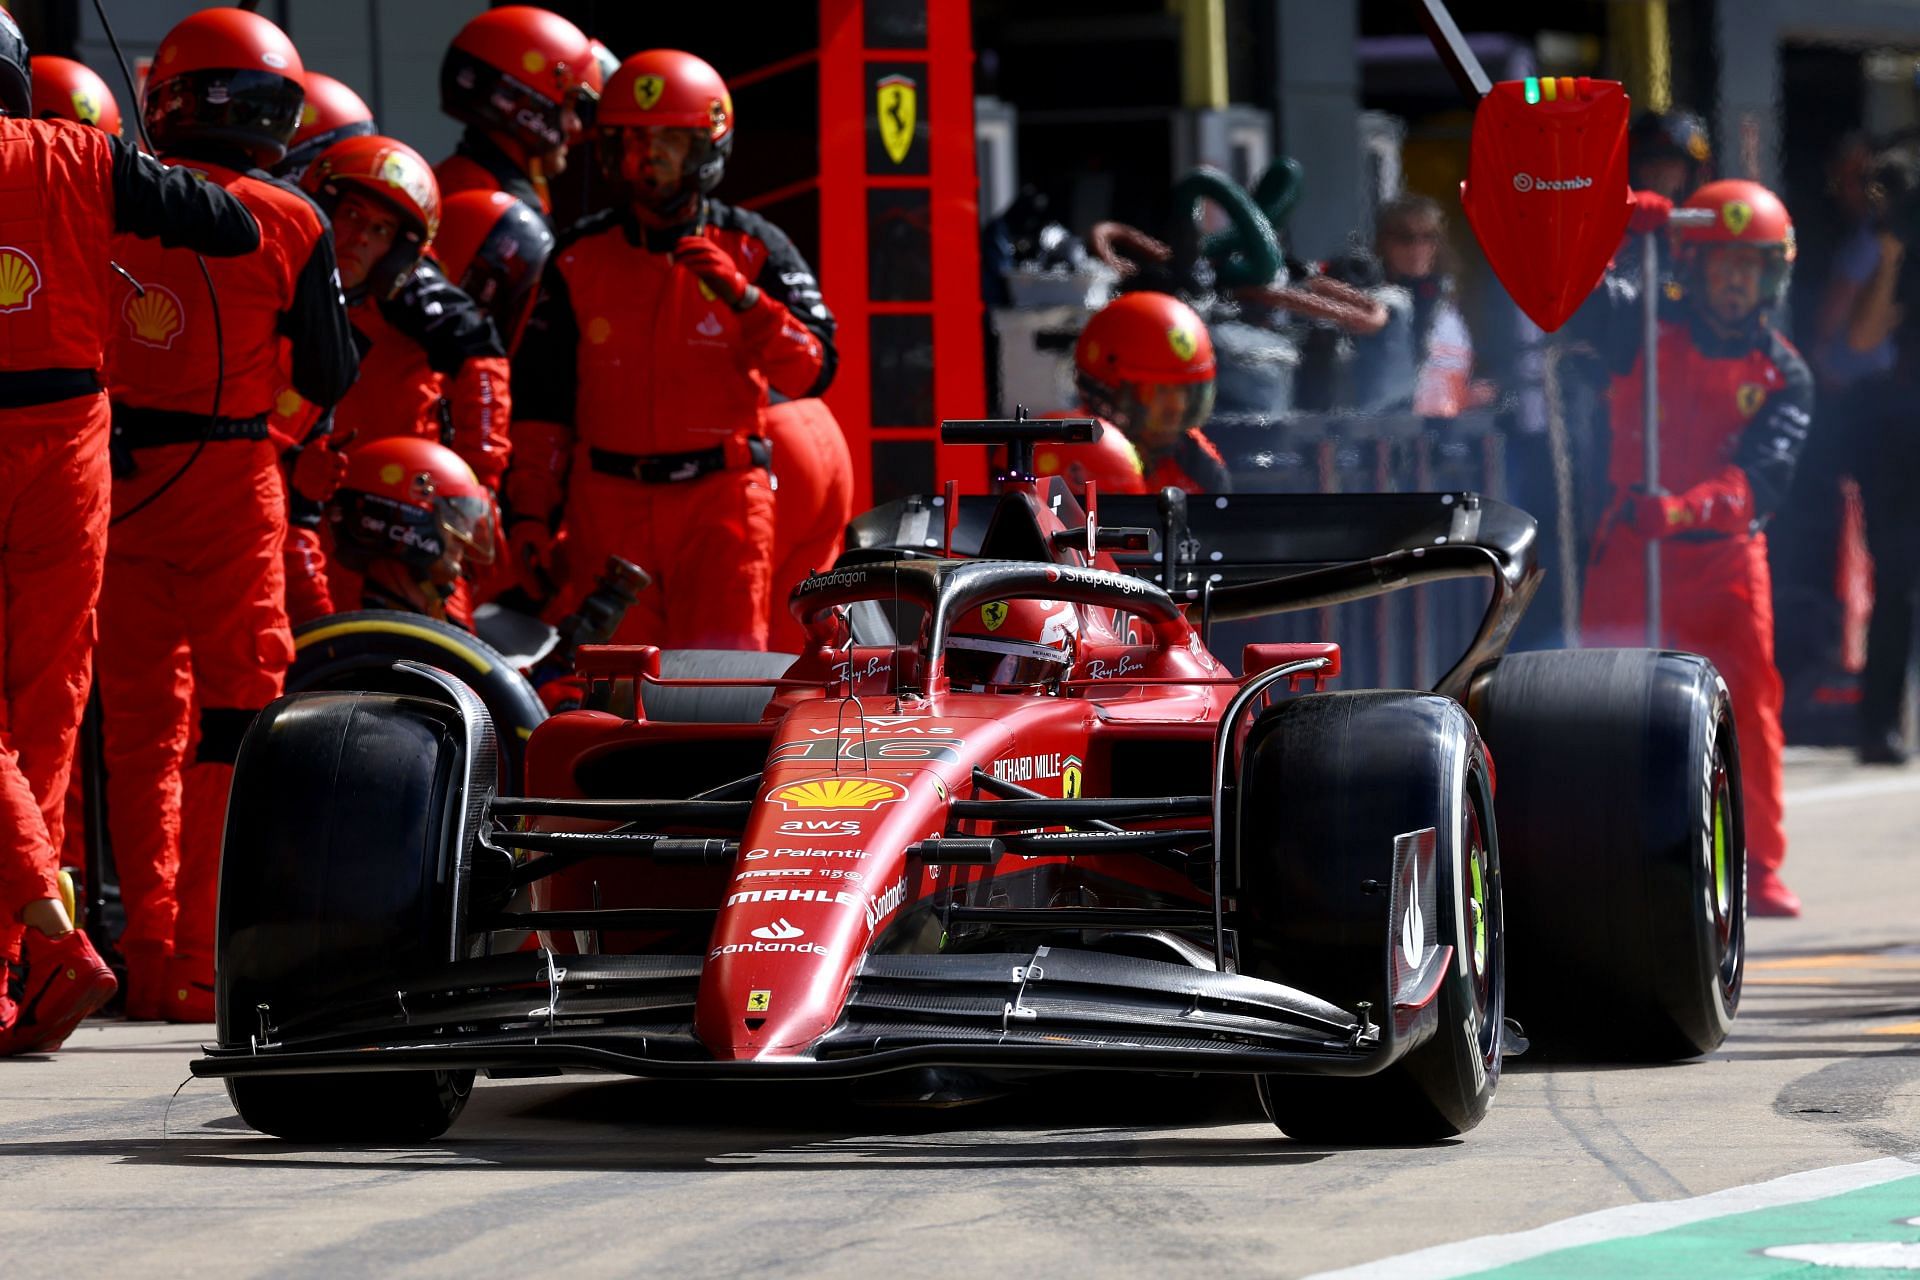 Charles Leclerc emerges from his pitstop at the 2022 F1 Grand Prix of Great Britain